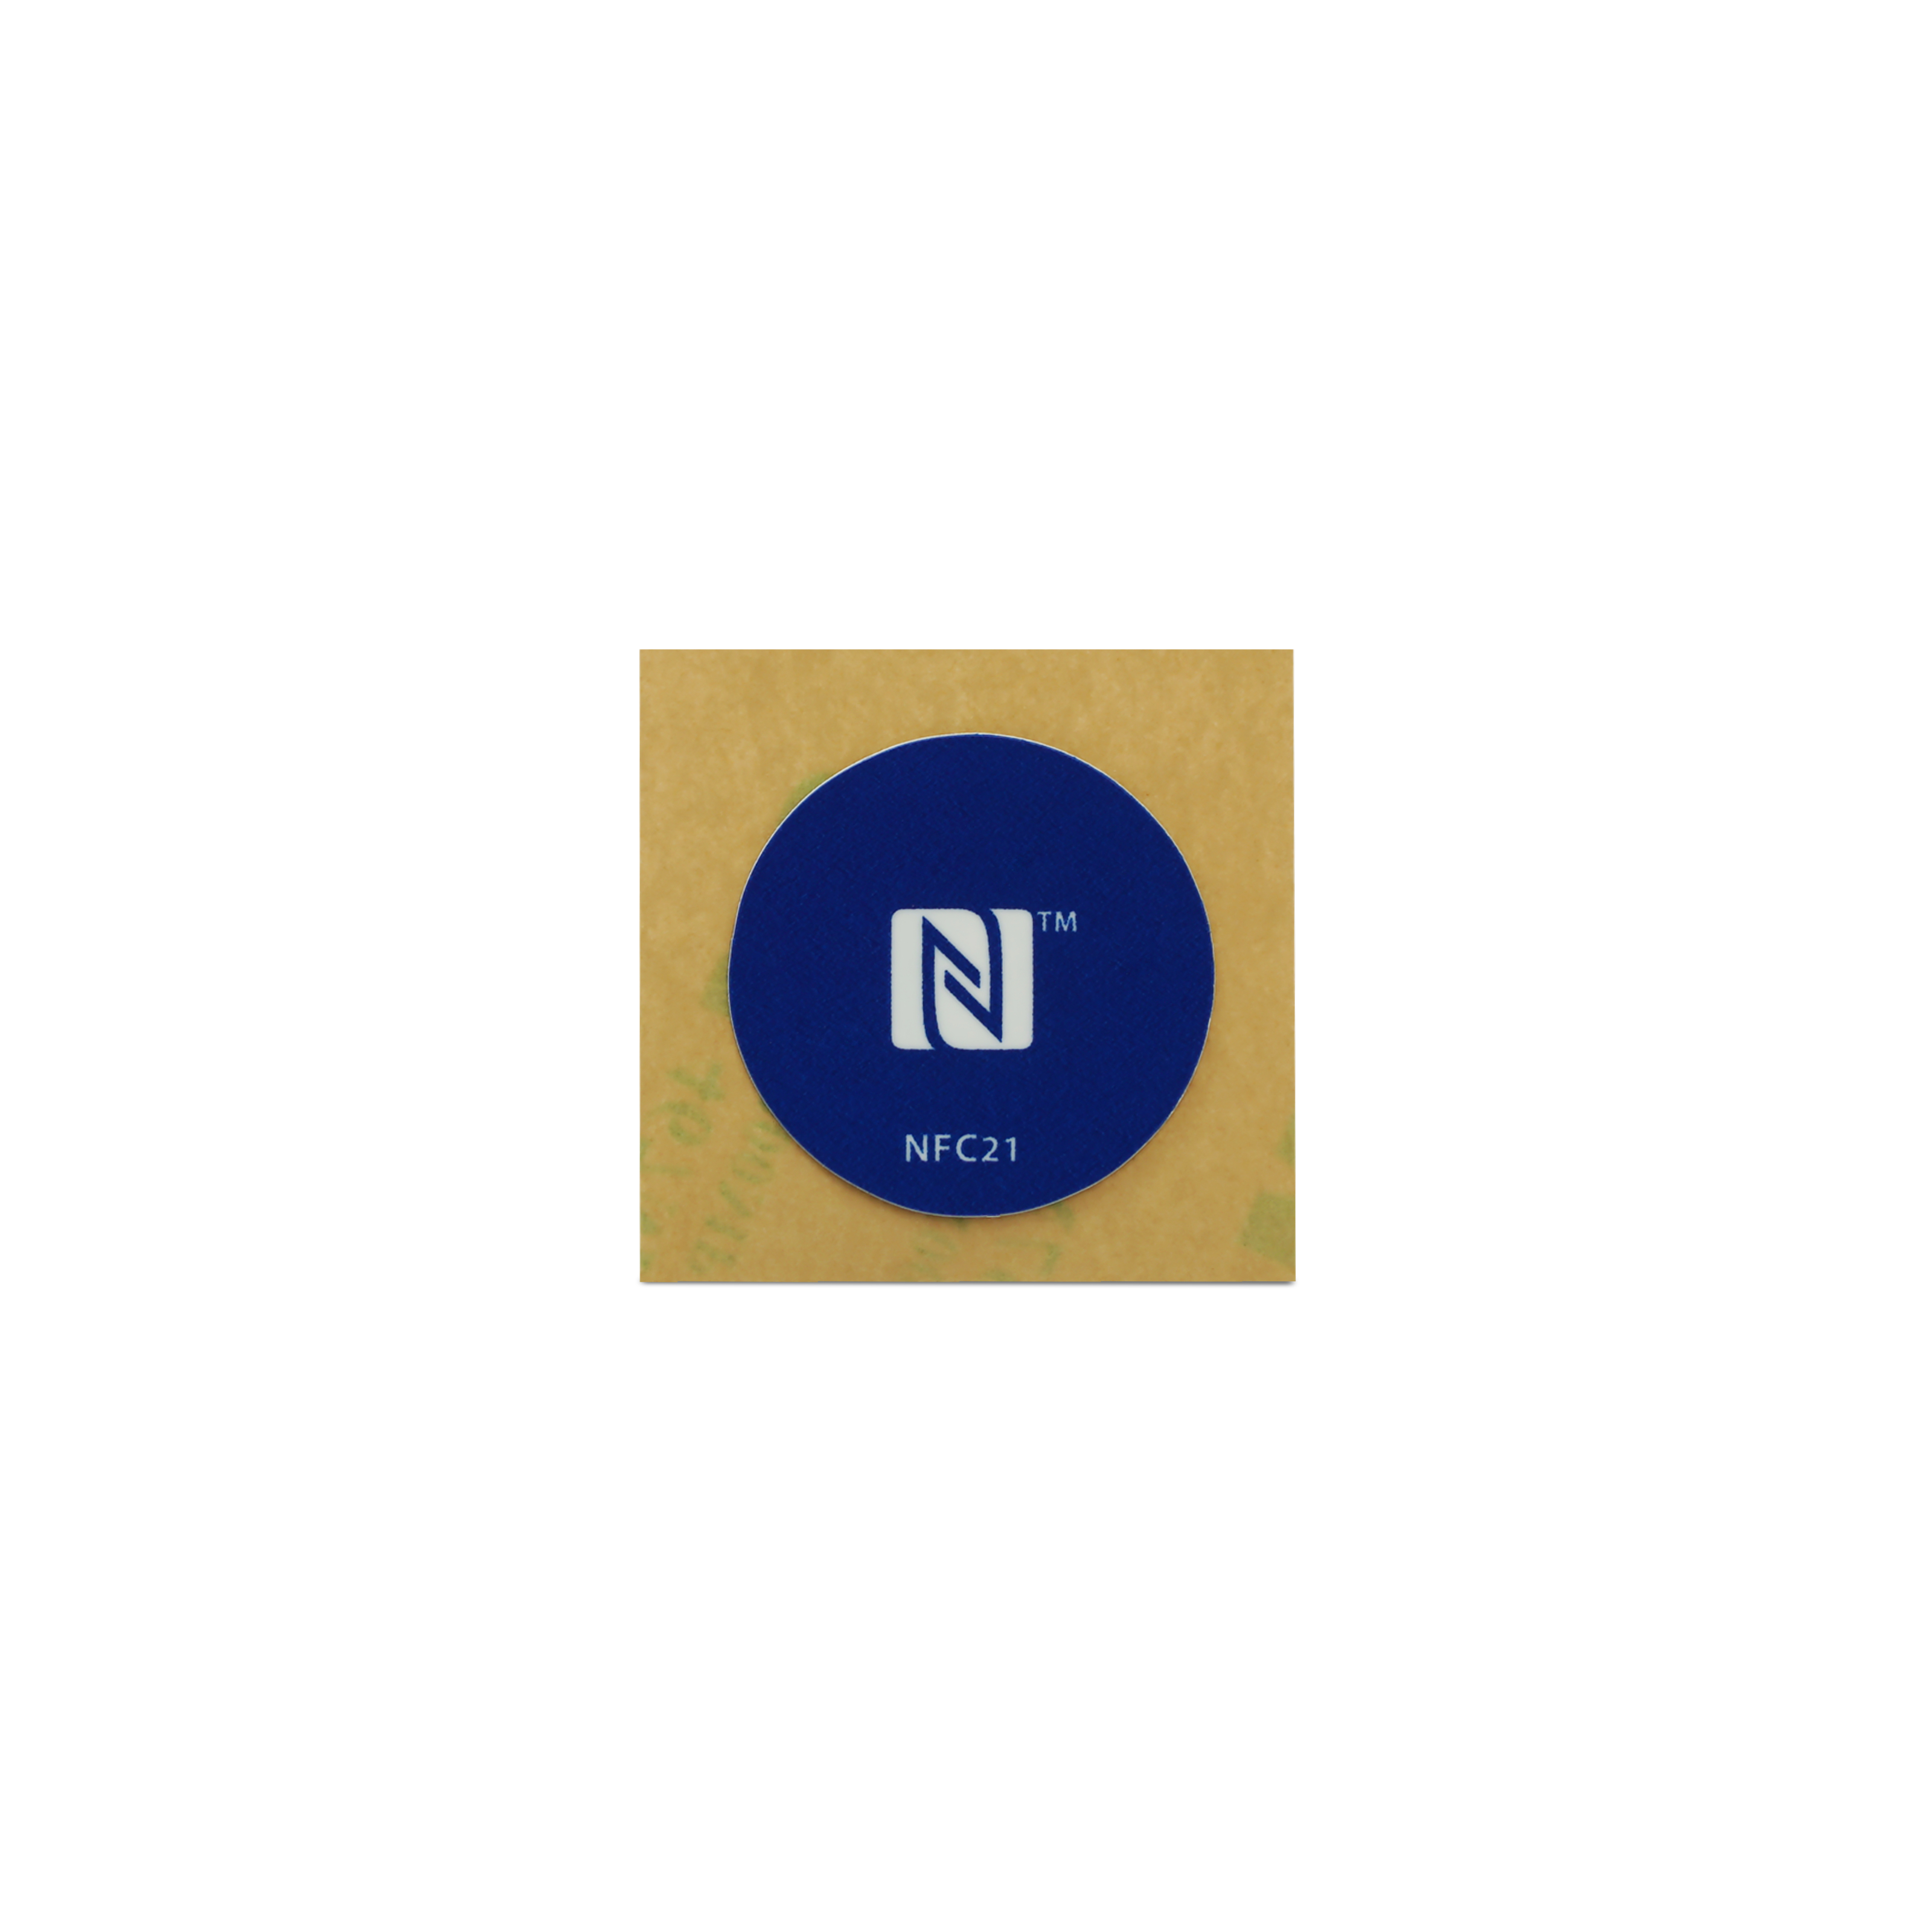 NFC Sticker PET - On-Metal - 22 mm - NTAG213 - 180 Byte - blue with logo